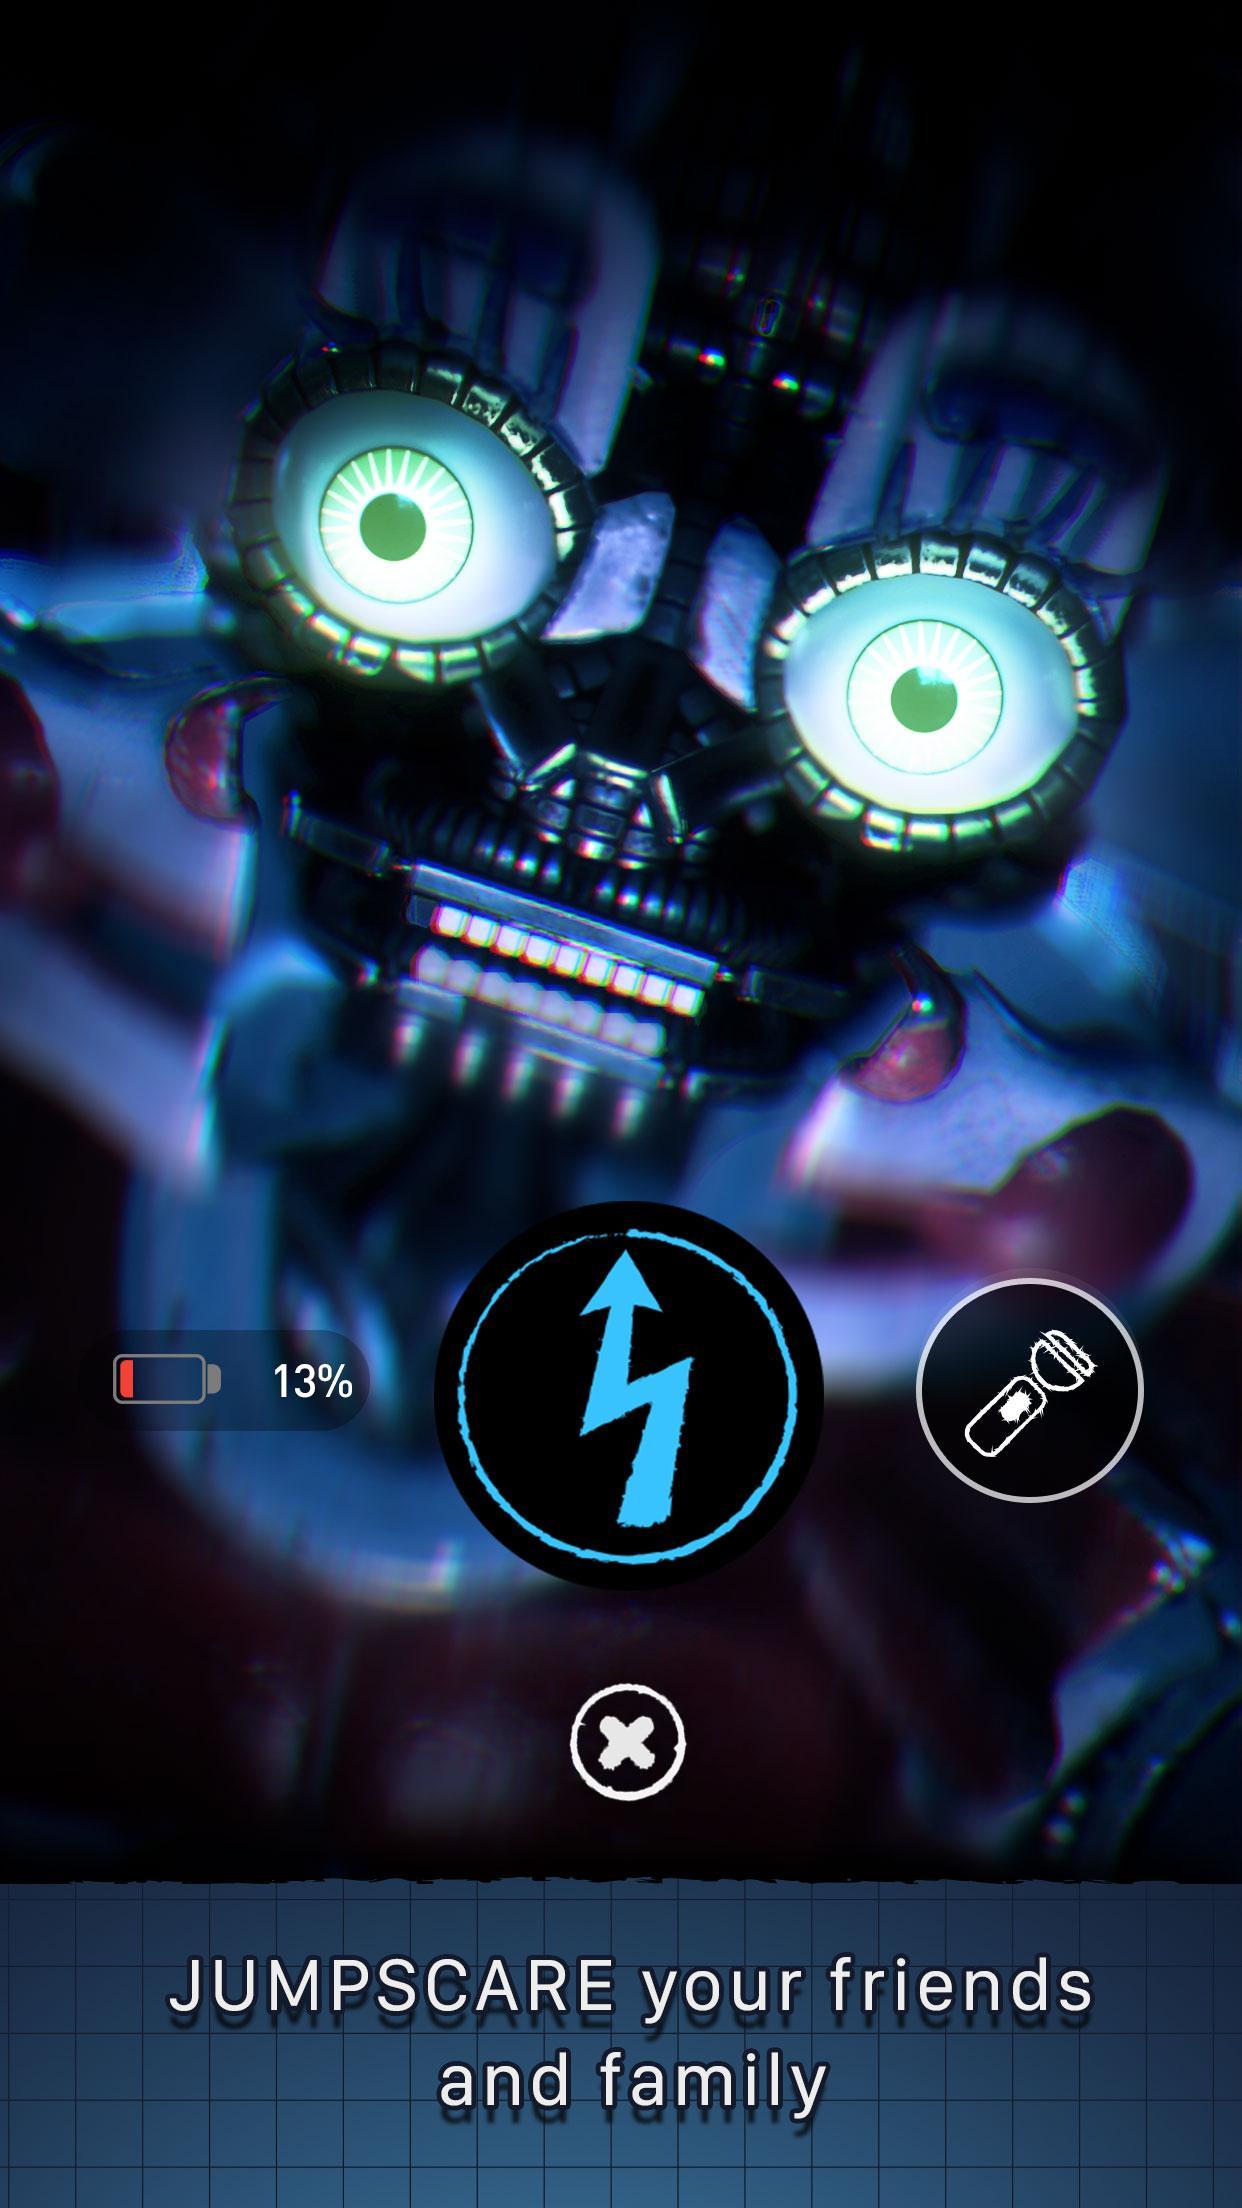 Five Nights at Freddy's AR: Special Delivery 1.1.1 APK Download by Illumix  Inc. - APKMirror